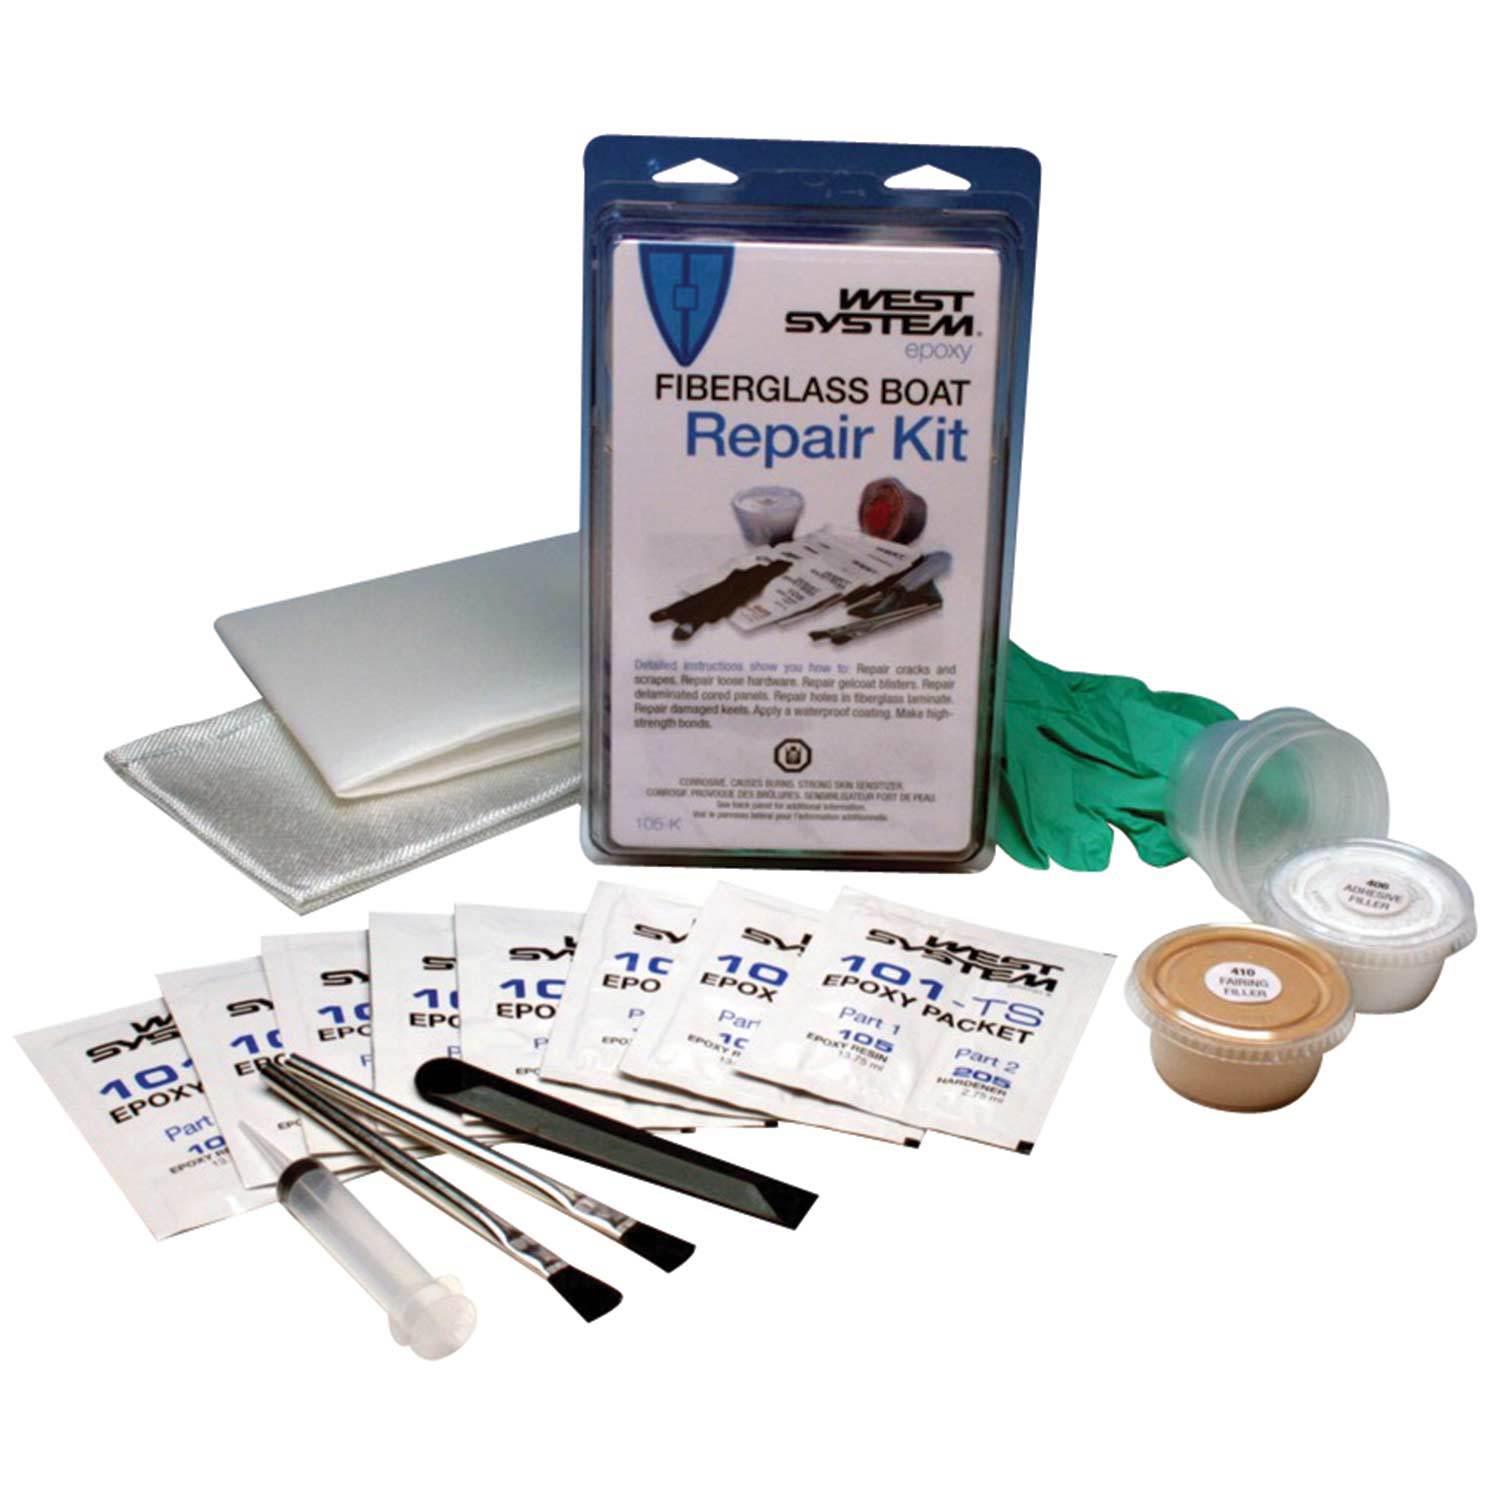  BSACGITOOD Marine Fiberglass Repair Kit for Boats - Gel Coat  Repair kit for Boats, Fiberglass Resin and Hardener kit for Fast Repair of  Holes, Chips and Cracks. : Sports & Outdoors